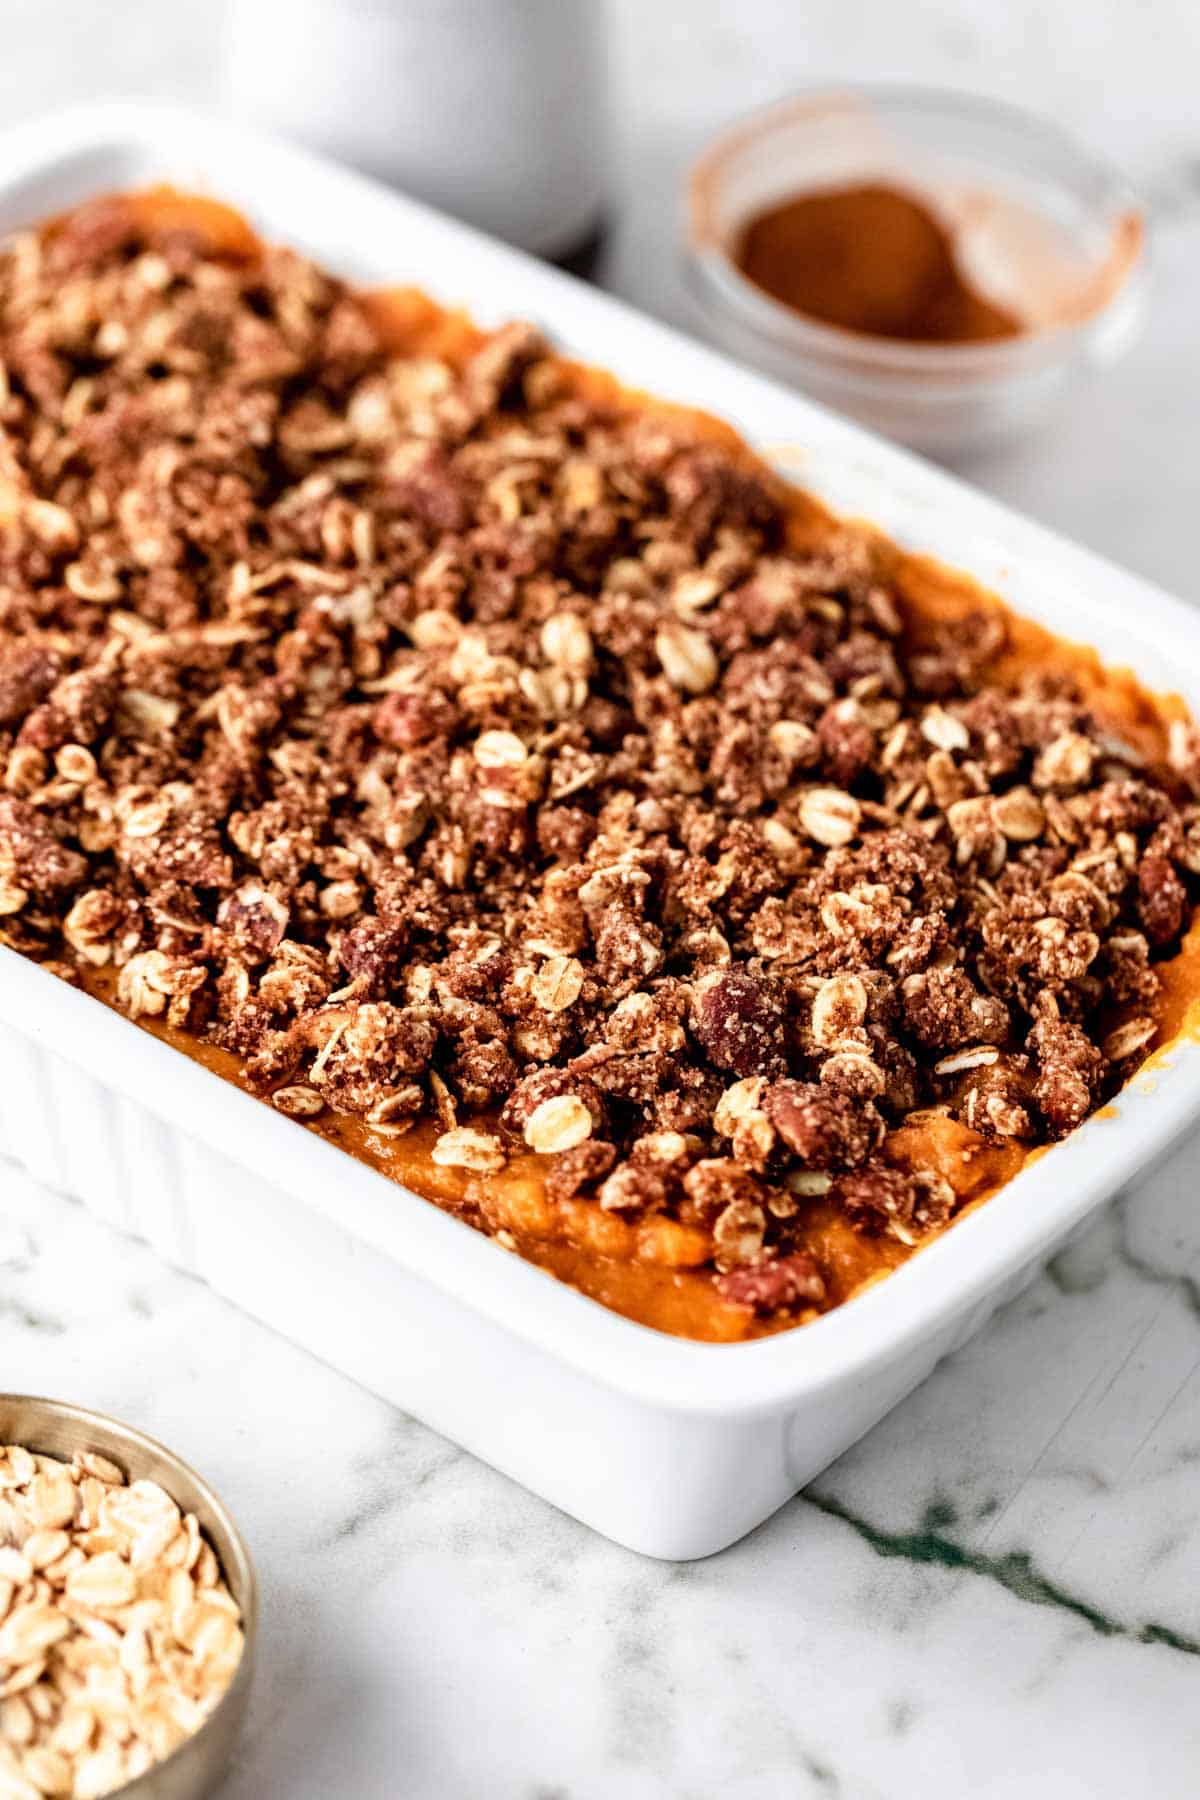 Sweet potato casserole topped with a pecan oat crumble in a rectangular baking dish.